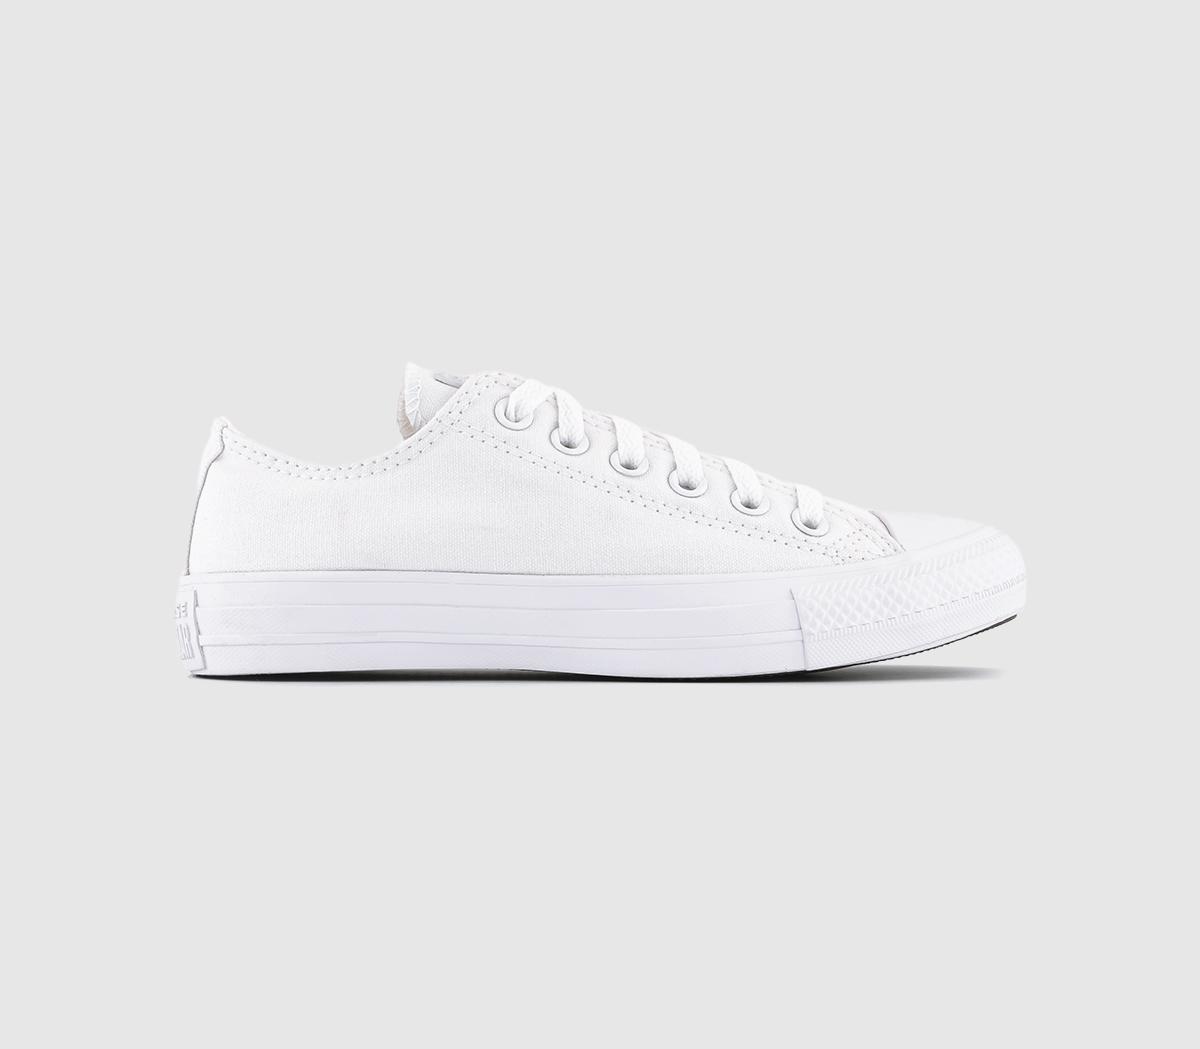 Converse All Star Low Trainers White Mono Canvas - Unisex Sports